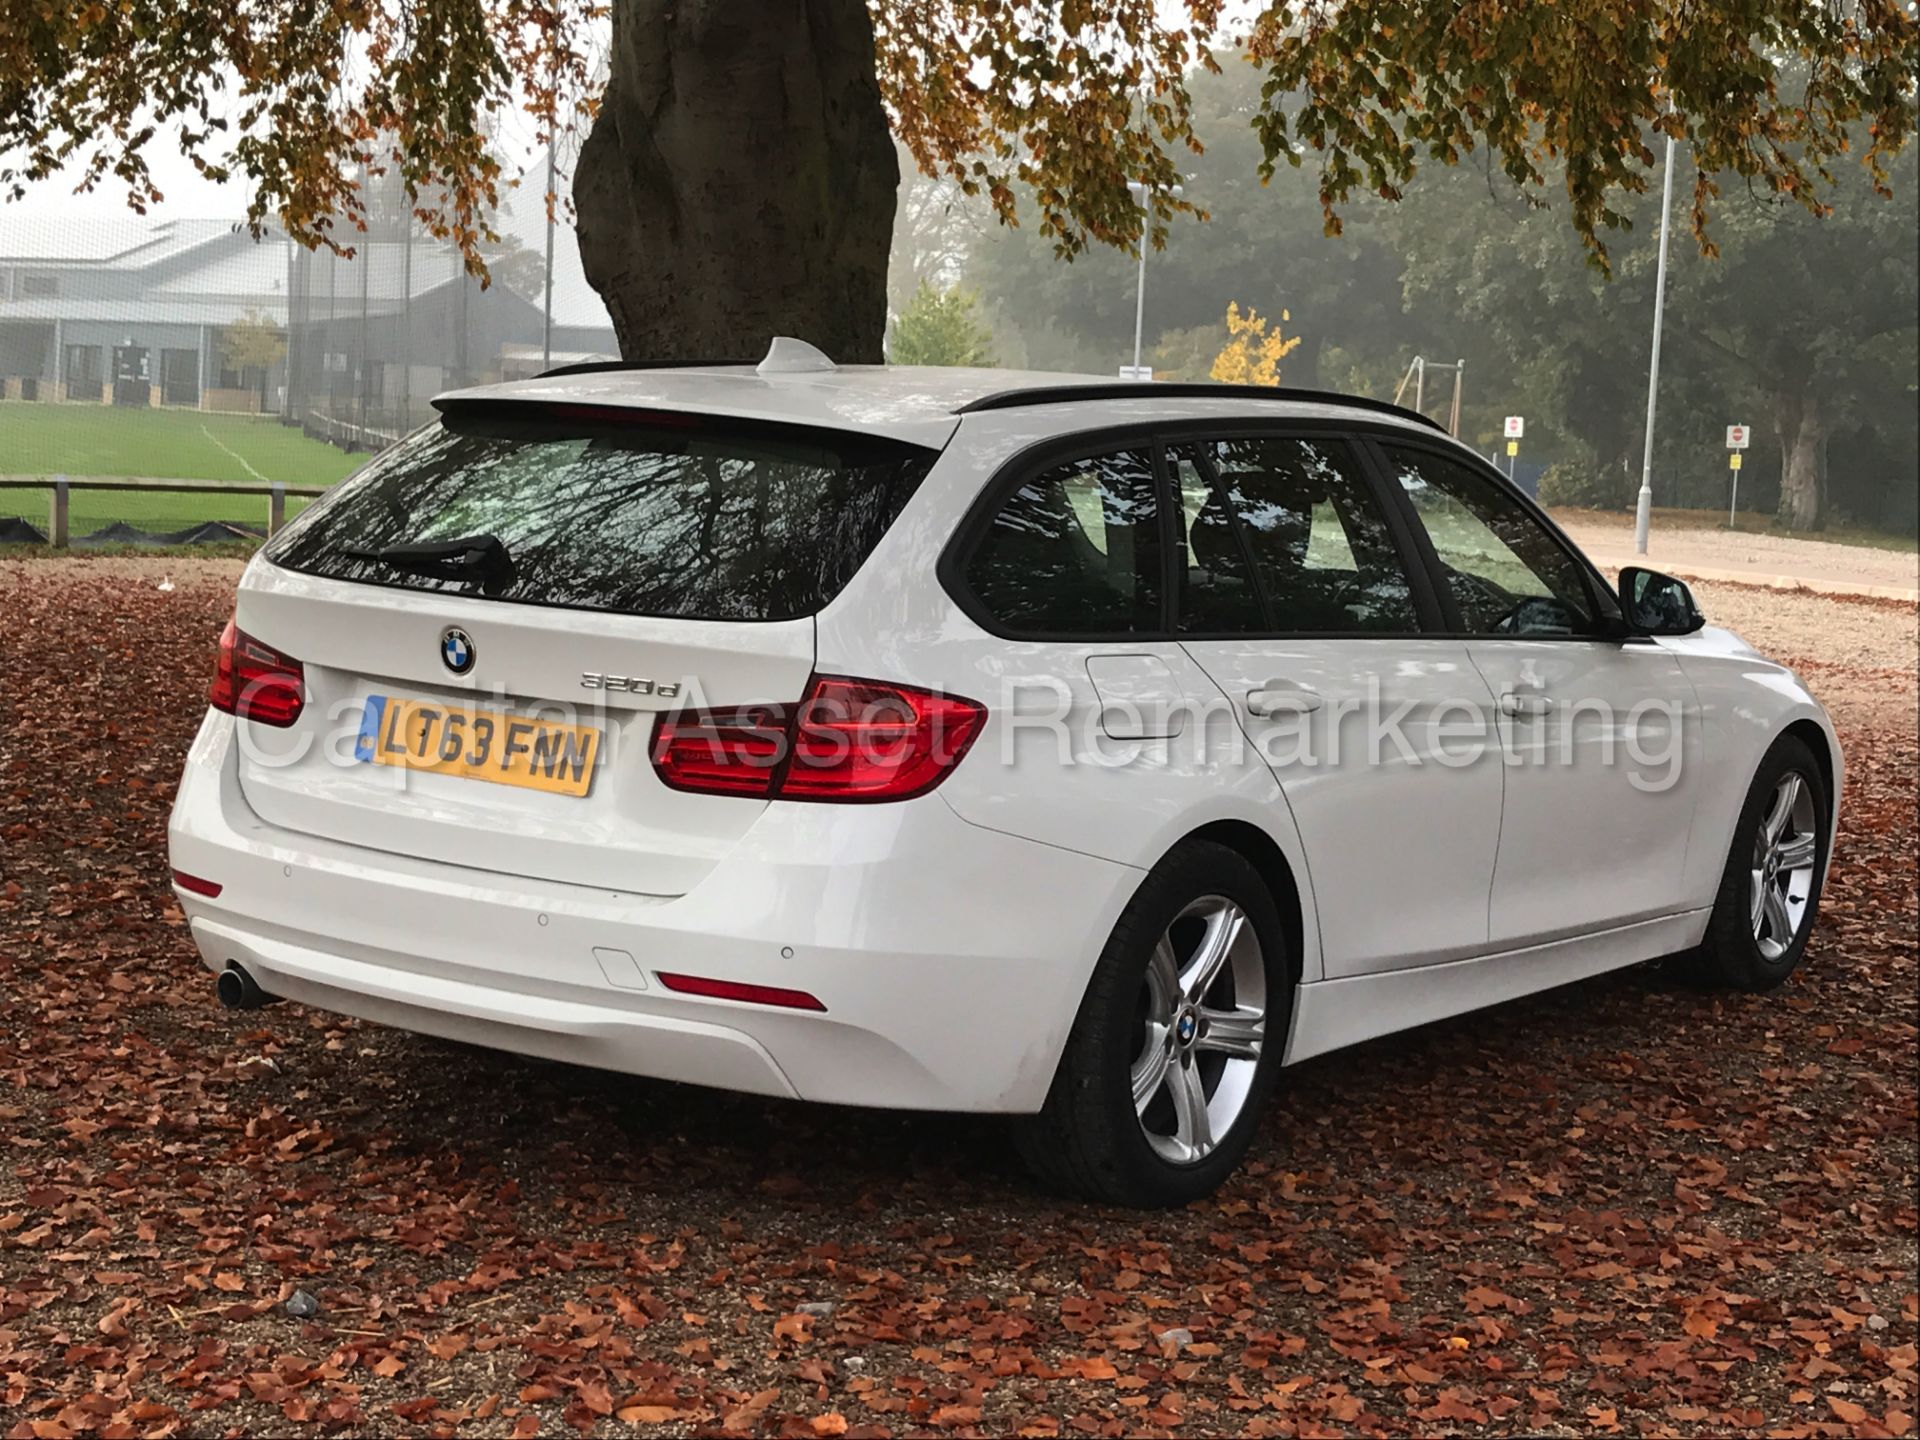 BMW 320d 'ESTATE / TOURING' (2014 MODEL) 8 SPEED AUTO - SAT NAV **FULLY LOADED** (1 OWNER FROM NEW) - Image 7 of 25